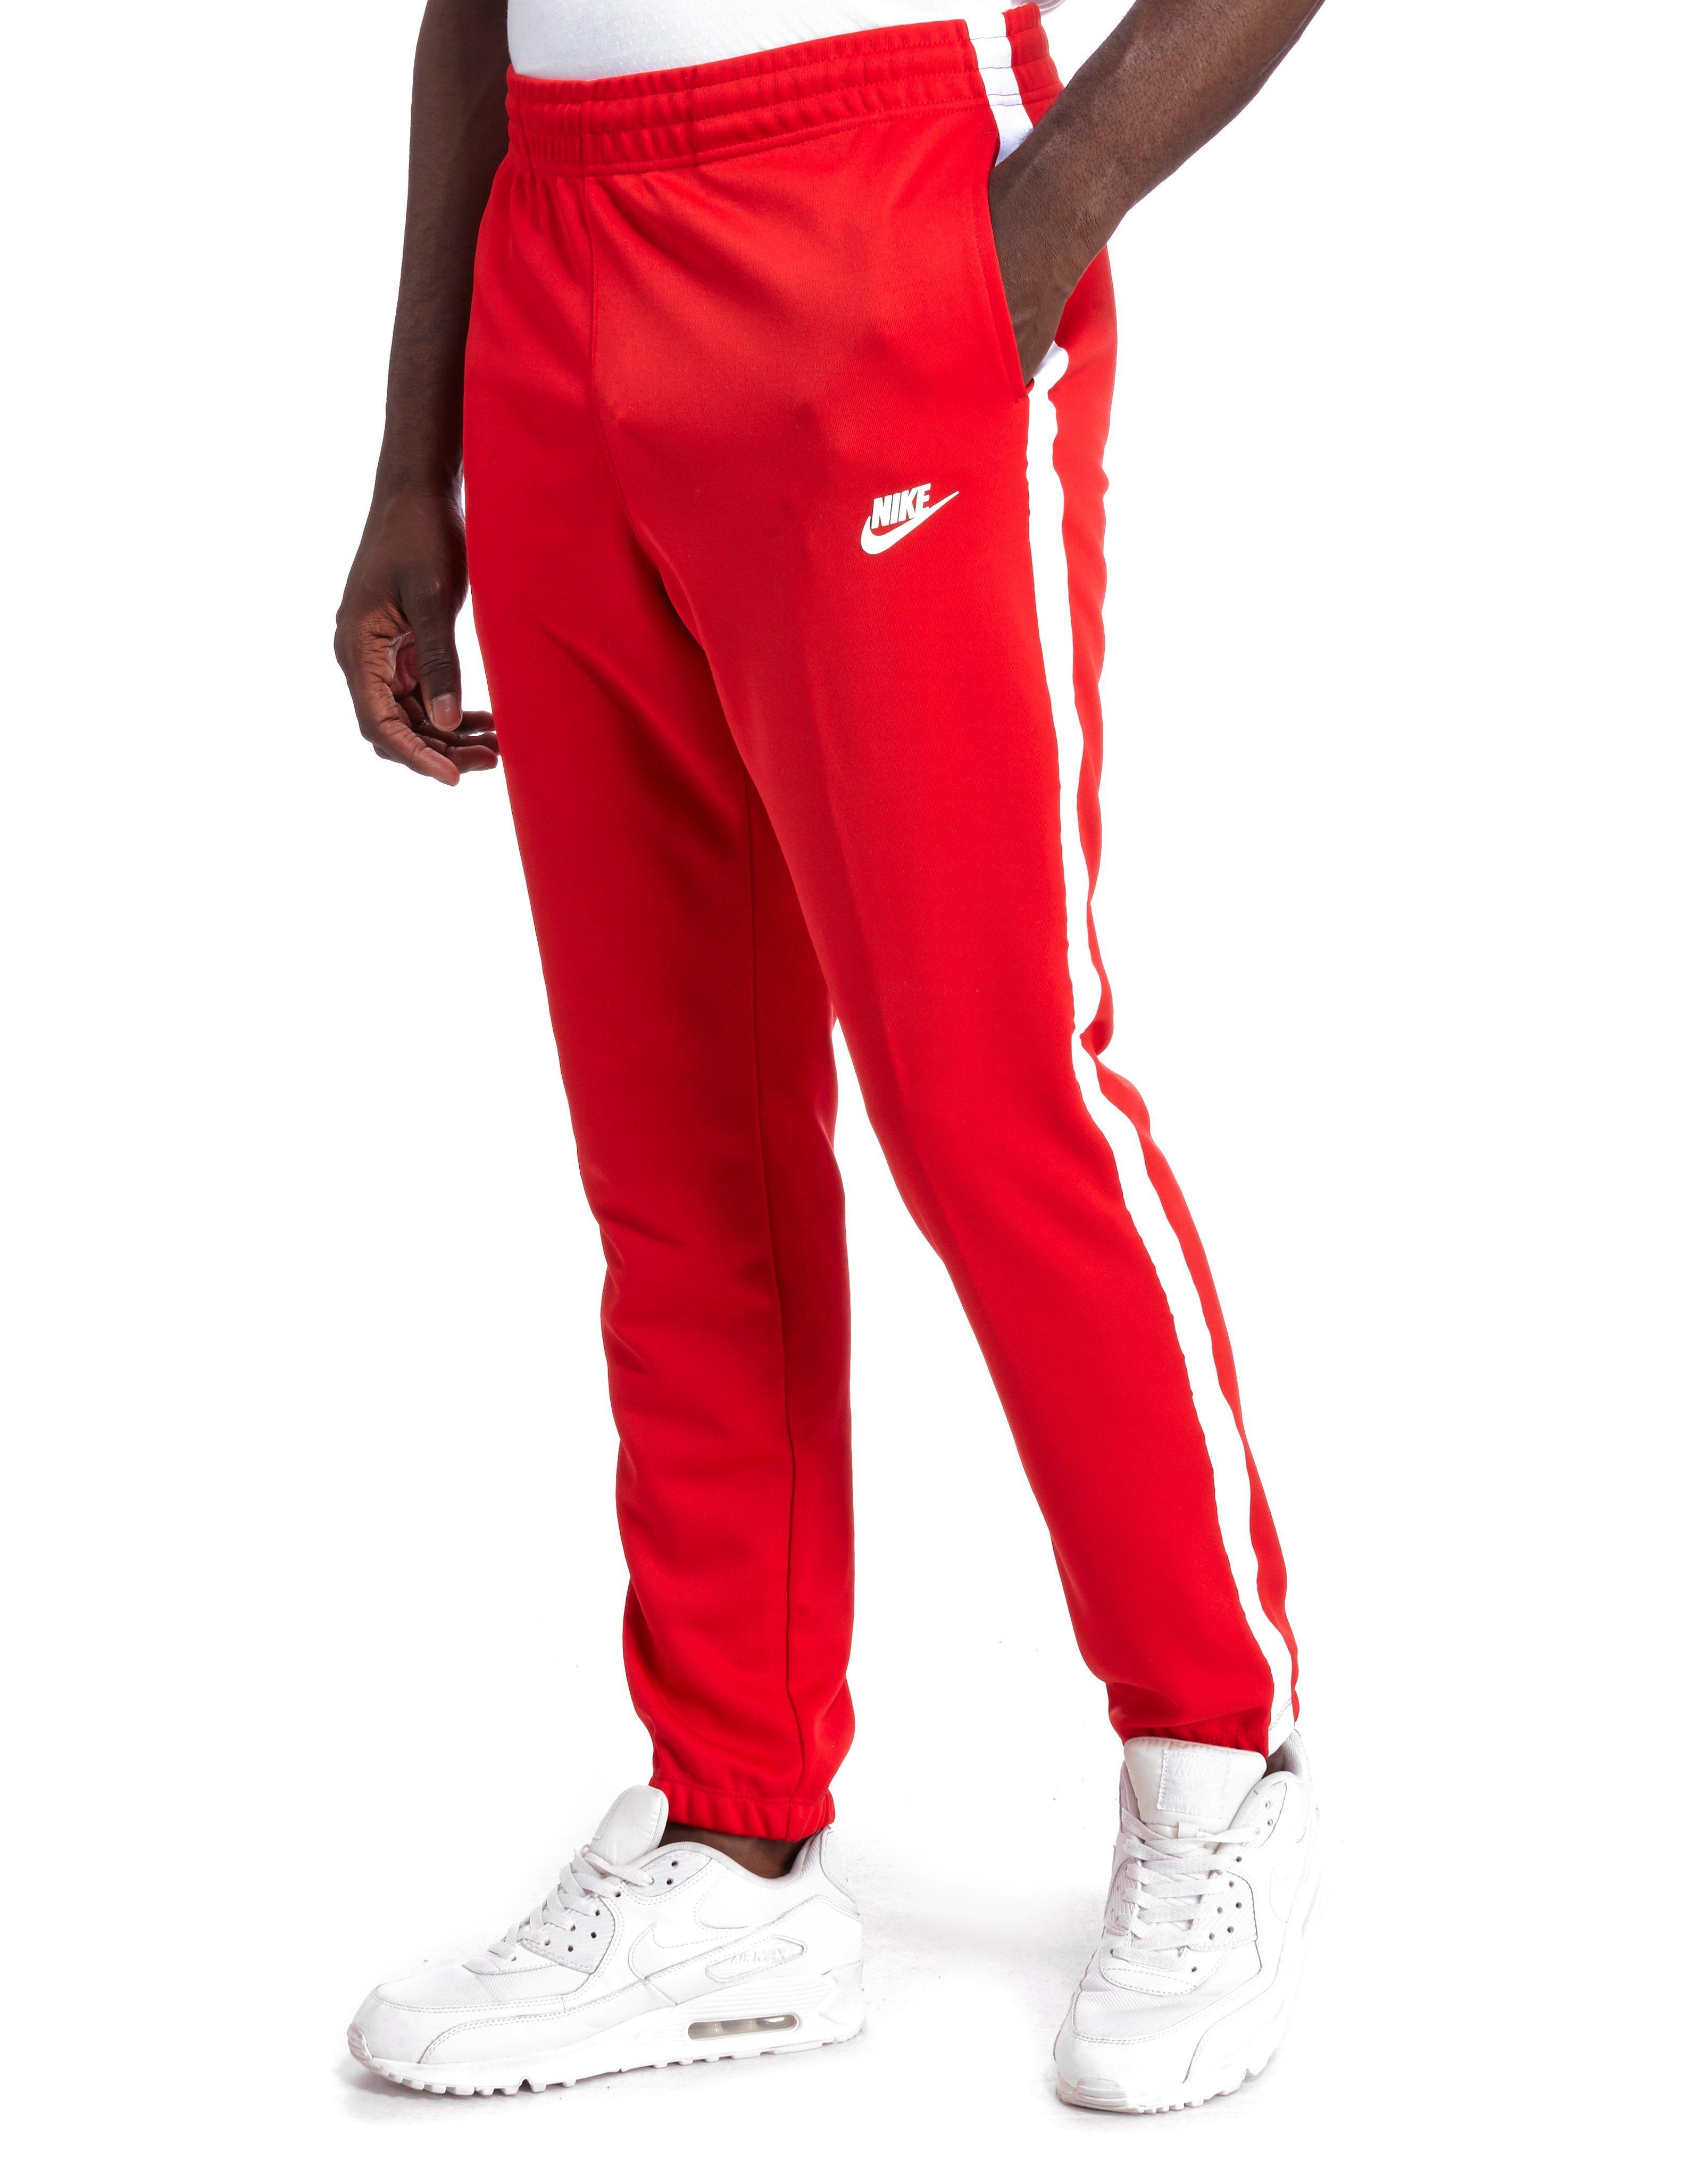 Nike Synthetic Limitless Poly Pants in University Red/White (Red) for ...